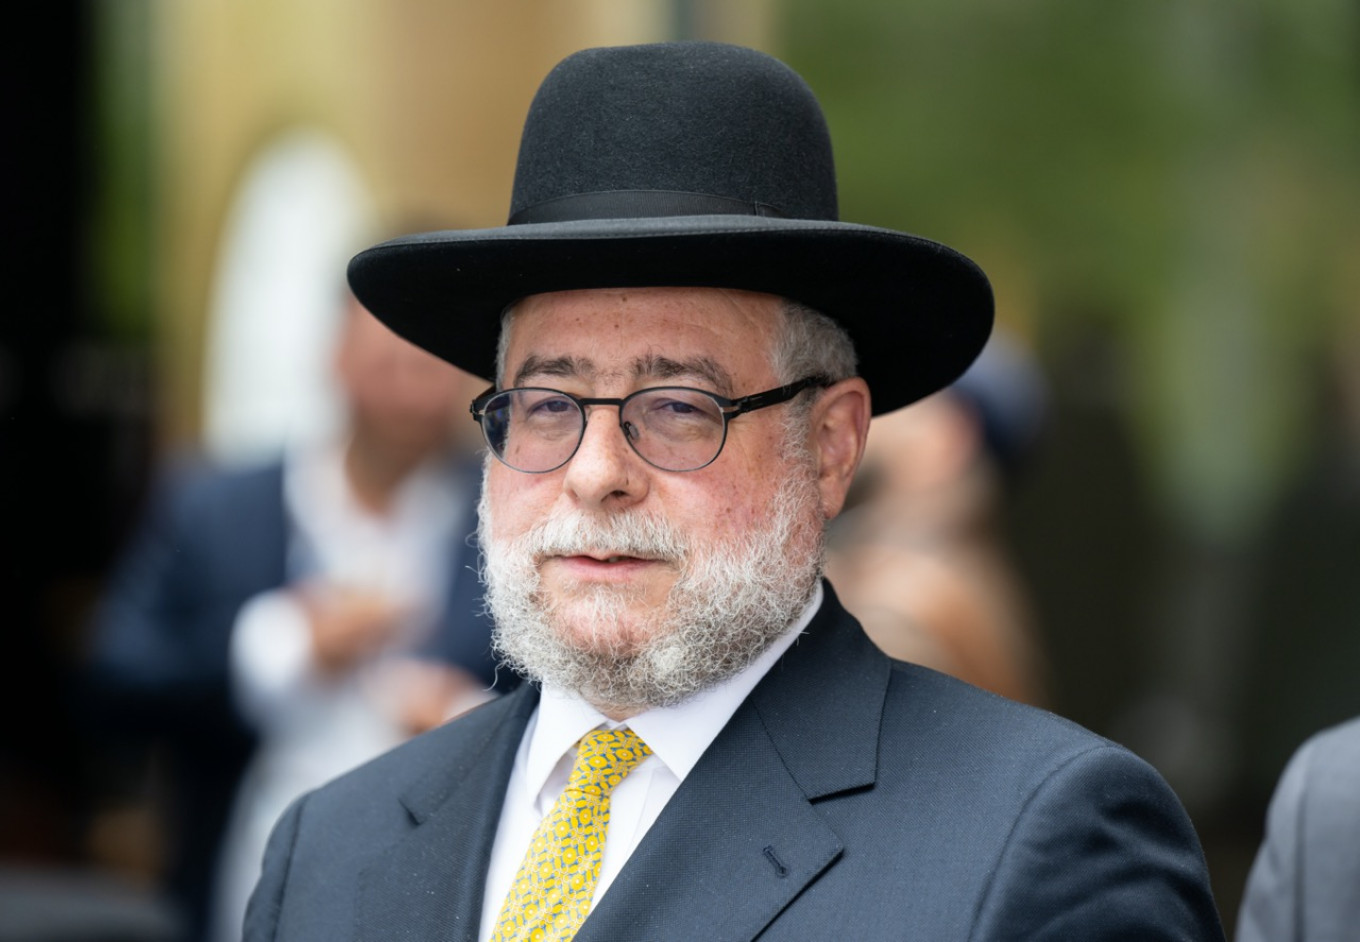 Moscow Chief Rabbi Leaves Russia, Alleging State Pressure Over War